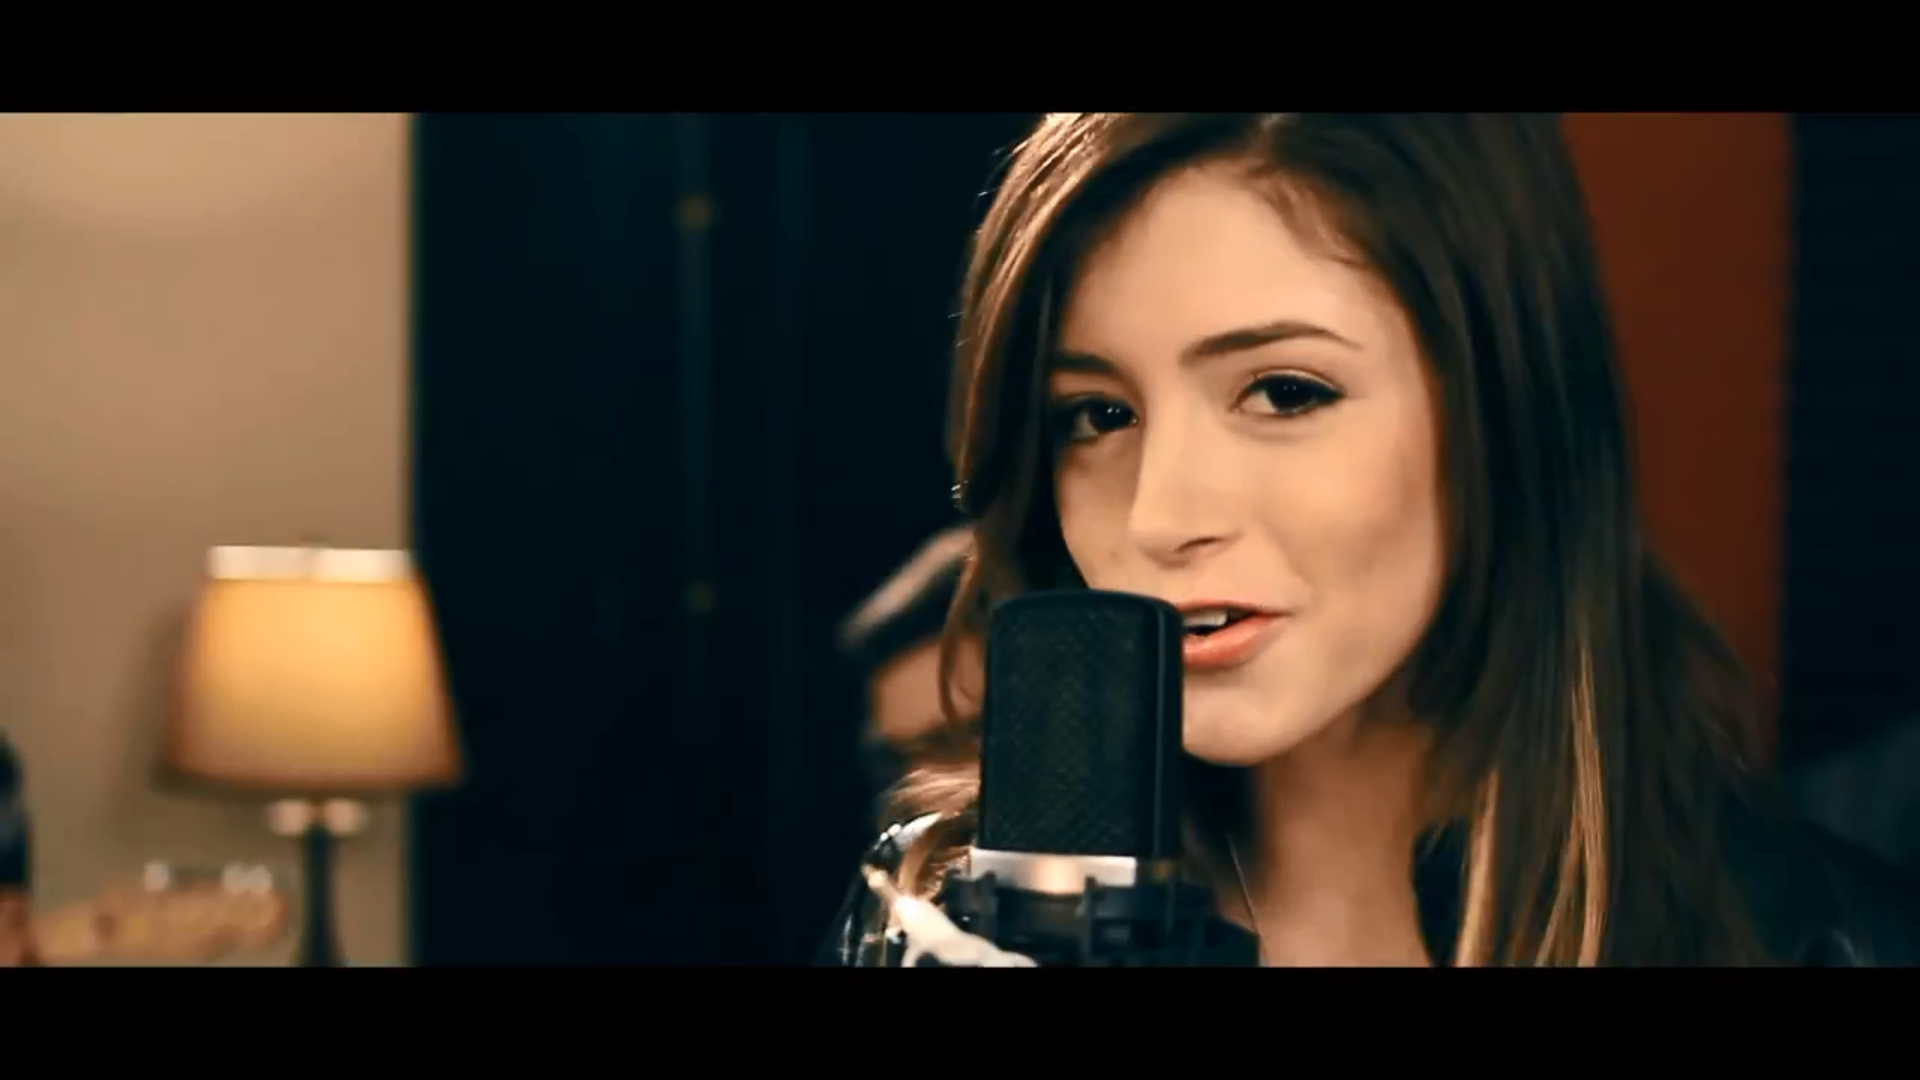 4470337 Chrissy Costanza Wallpapers | Chrissy Costanza Backgrounds